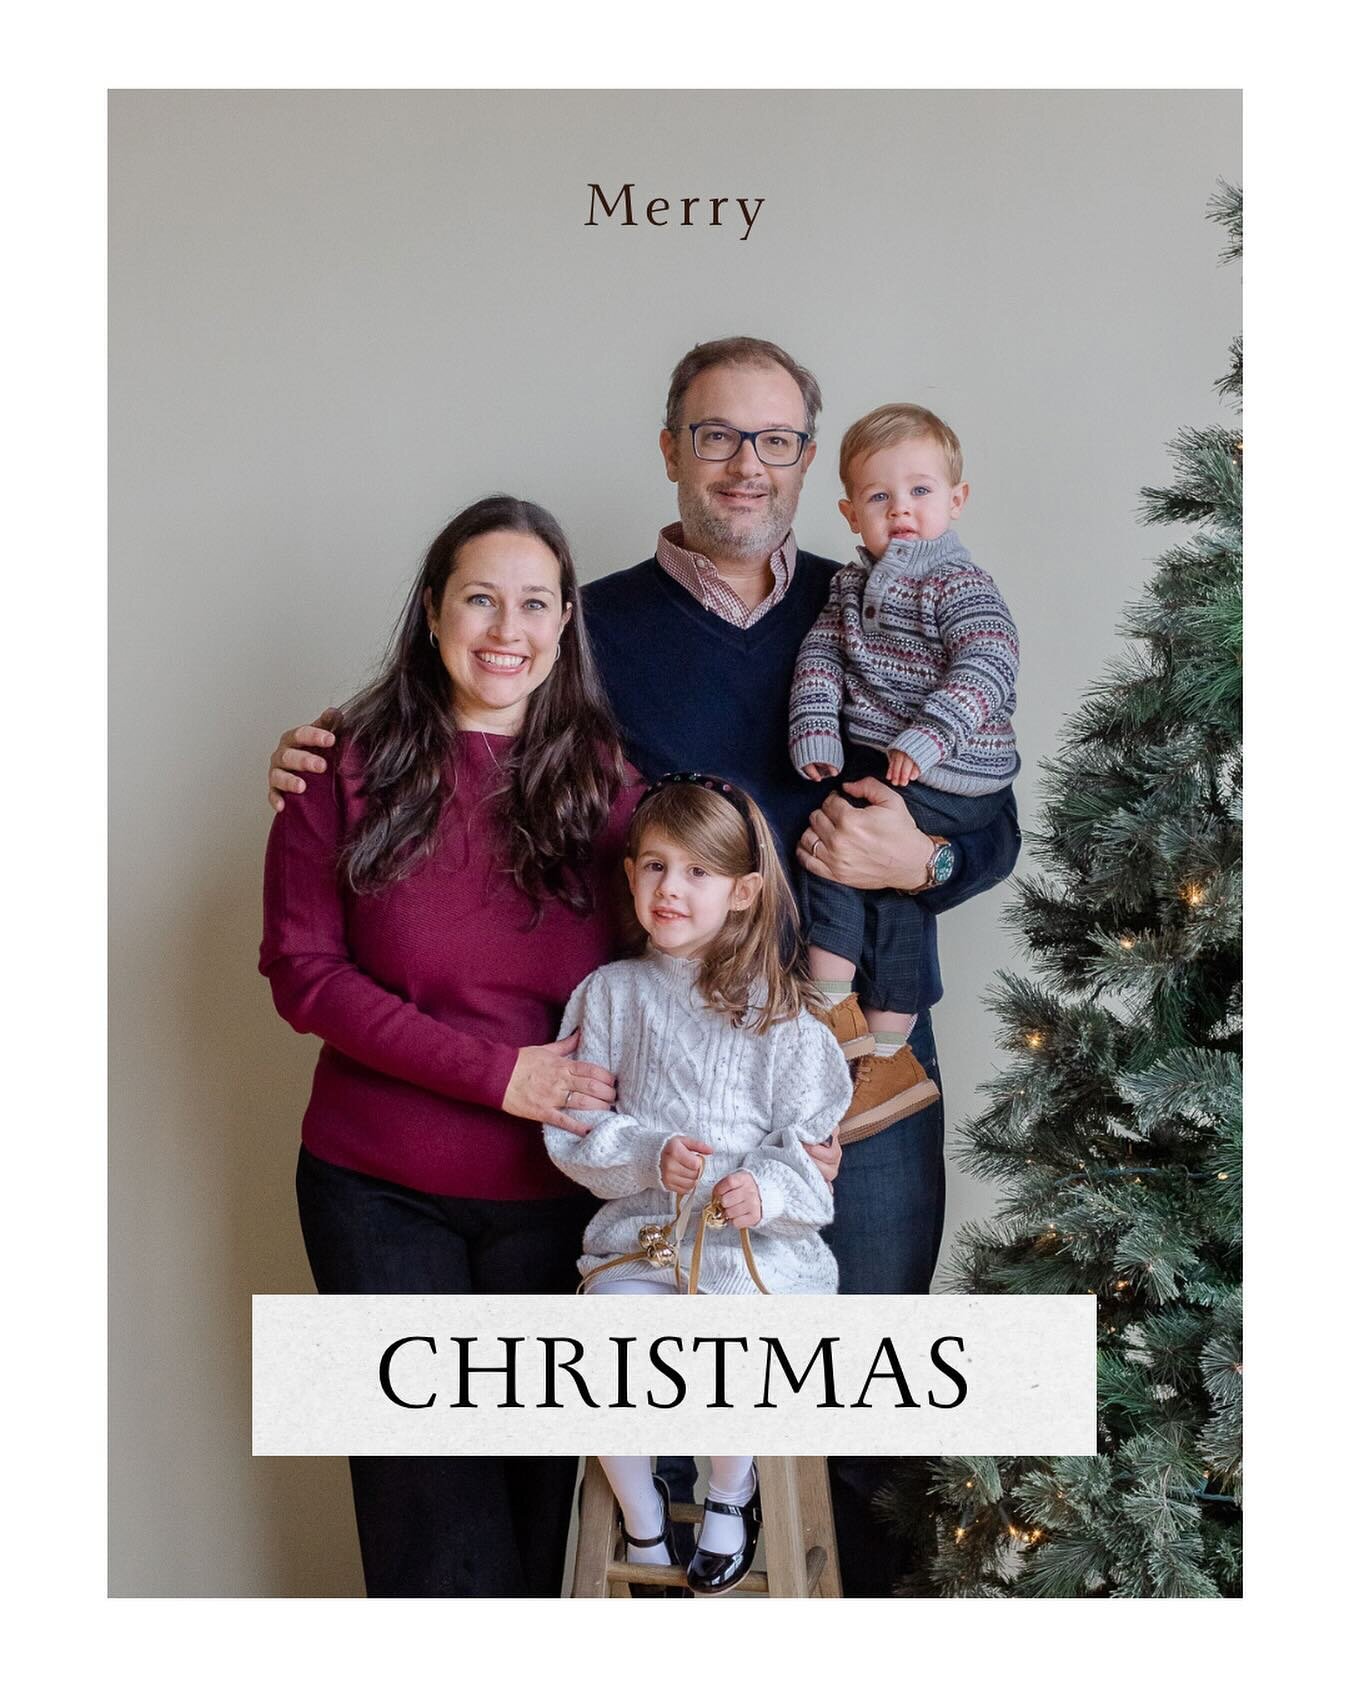 Merry Christmas to all of you and your families 🎄

I&rsquo;m signing off for the holidays and looking forward to spending time with family and friends, my kids&rsquo; excitement for Santa&rsquo;s presents, the warmth of traditions, and the good food